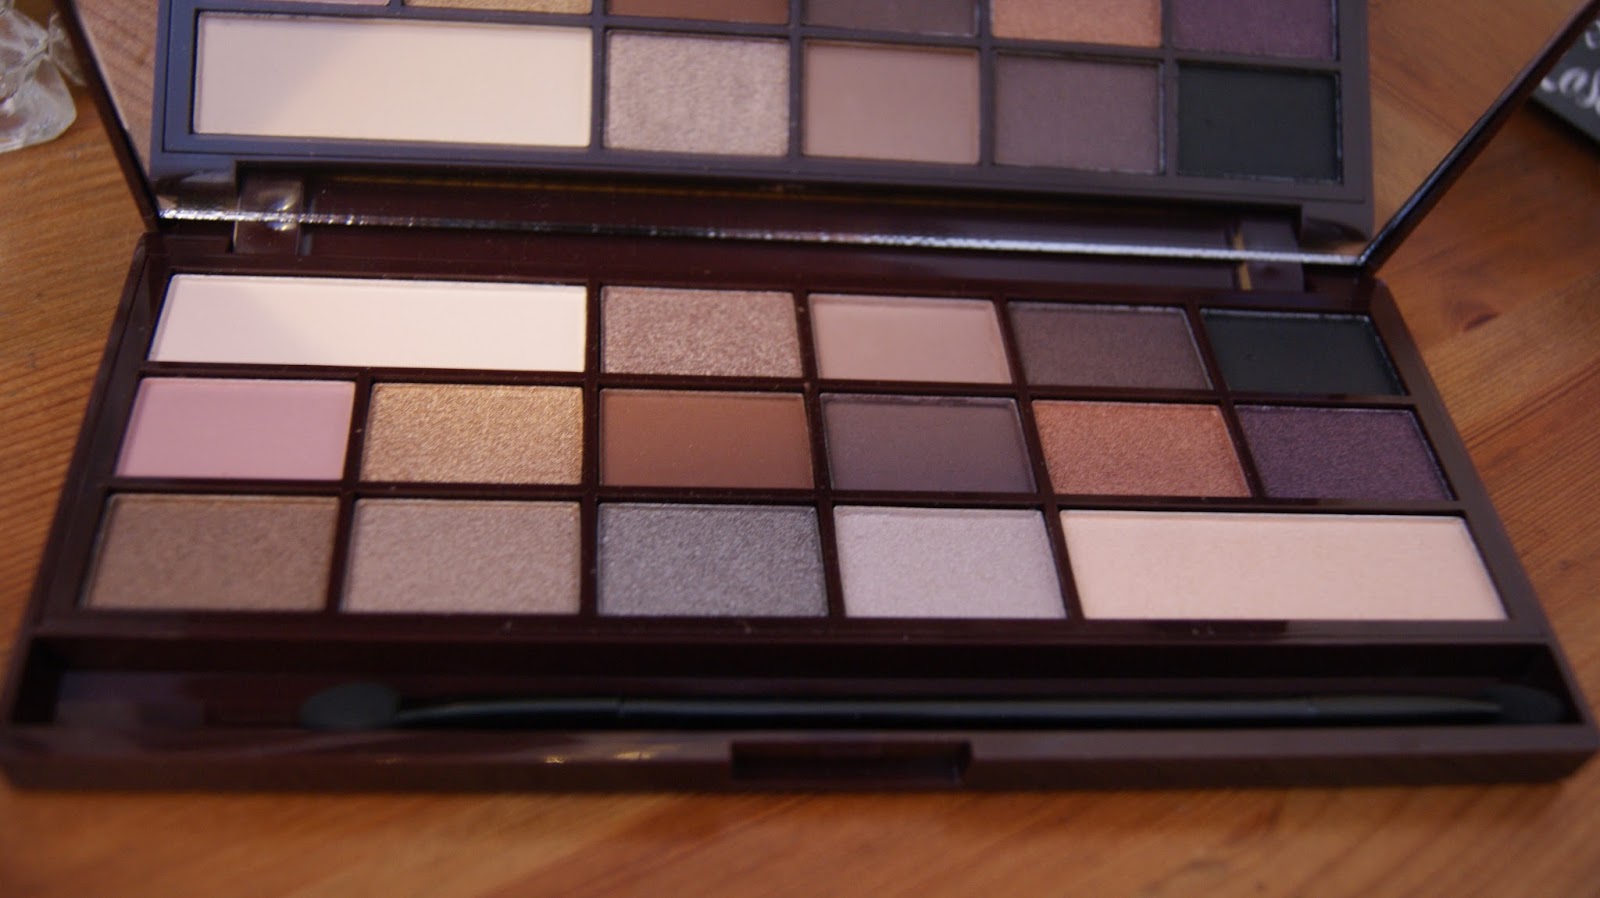 Makeup Revolution Death By Chocolate Palette Eyeshadow Colours